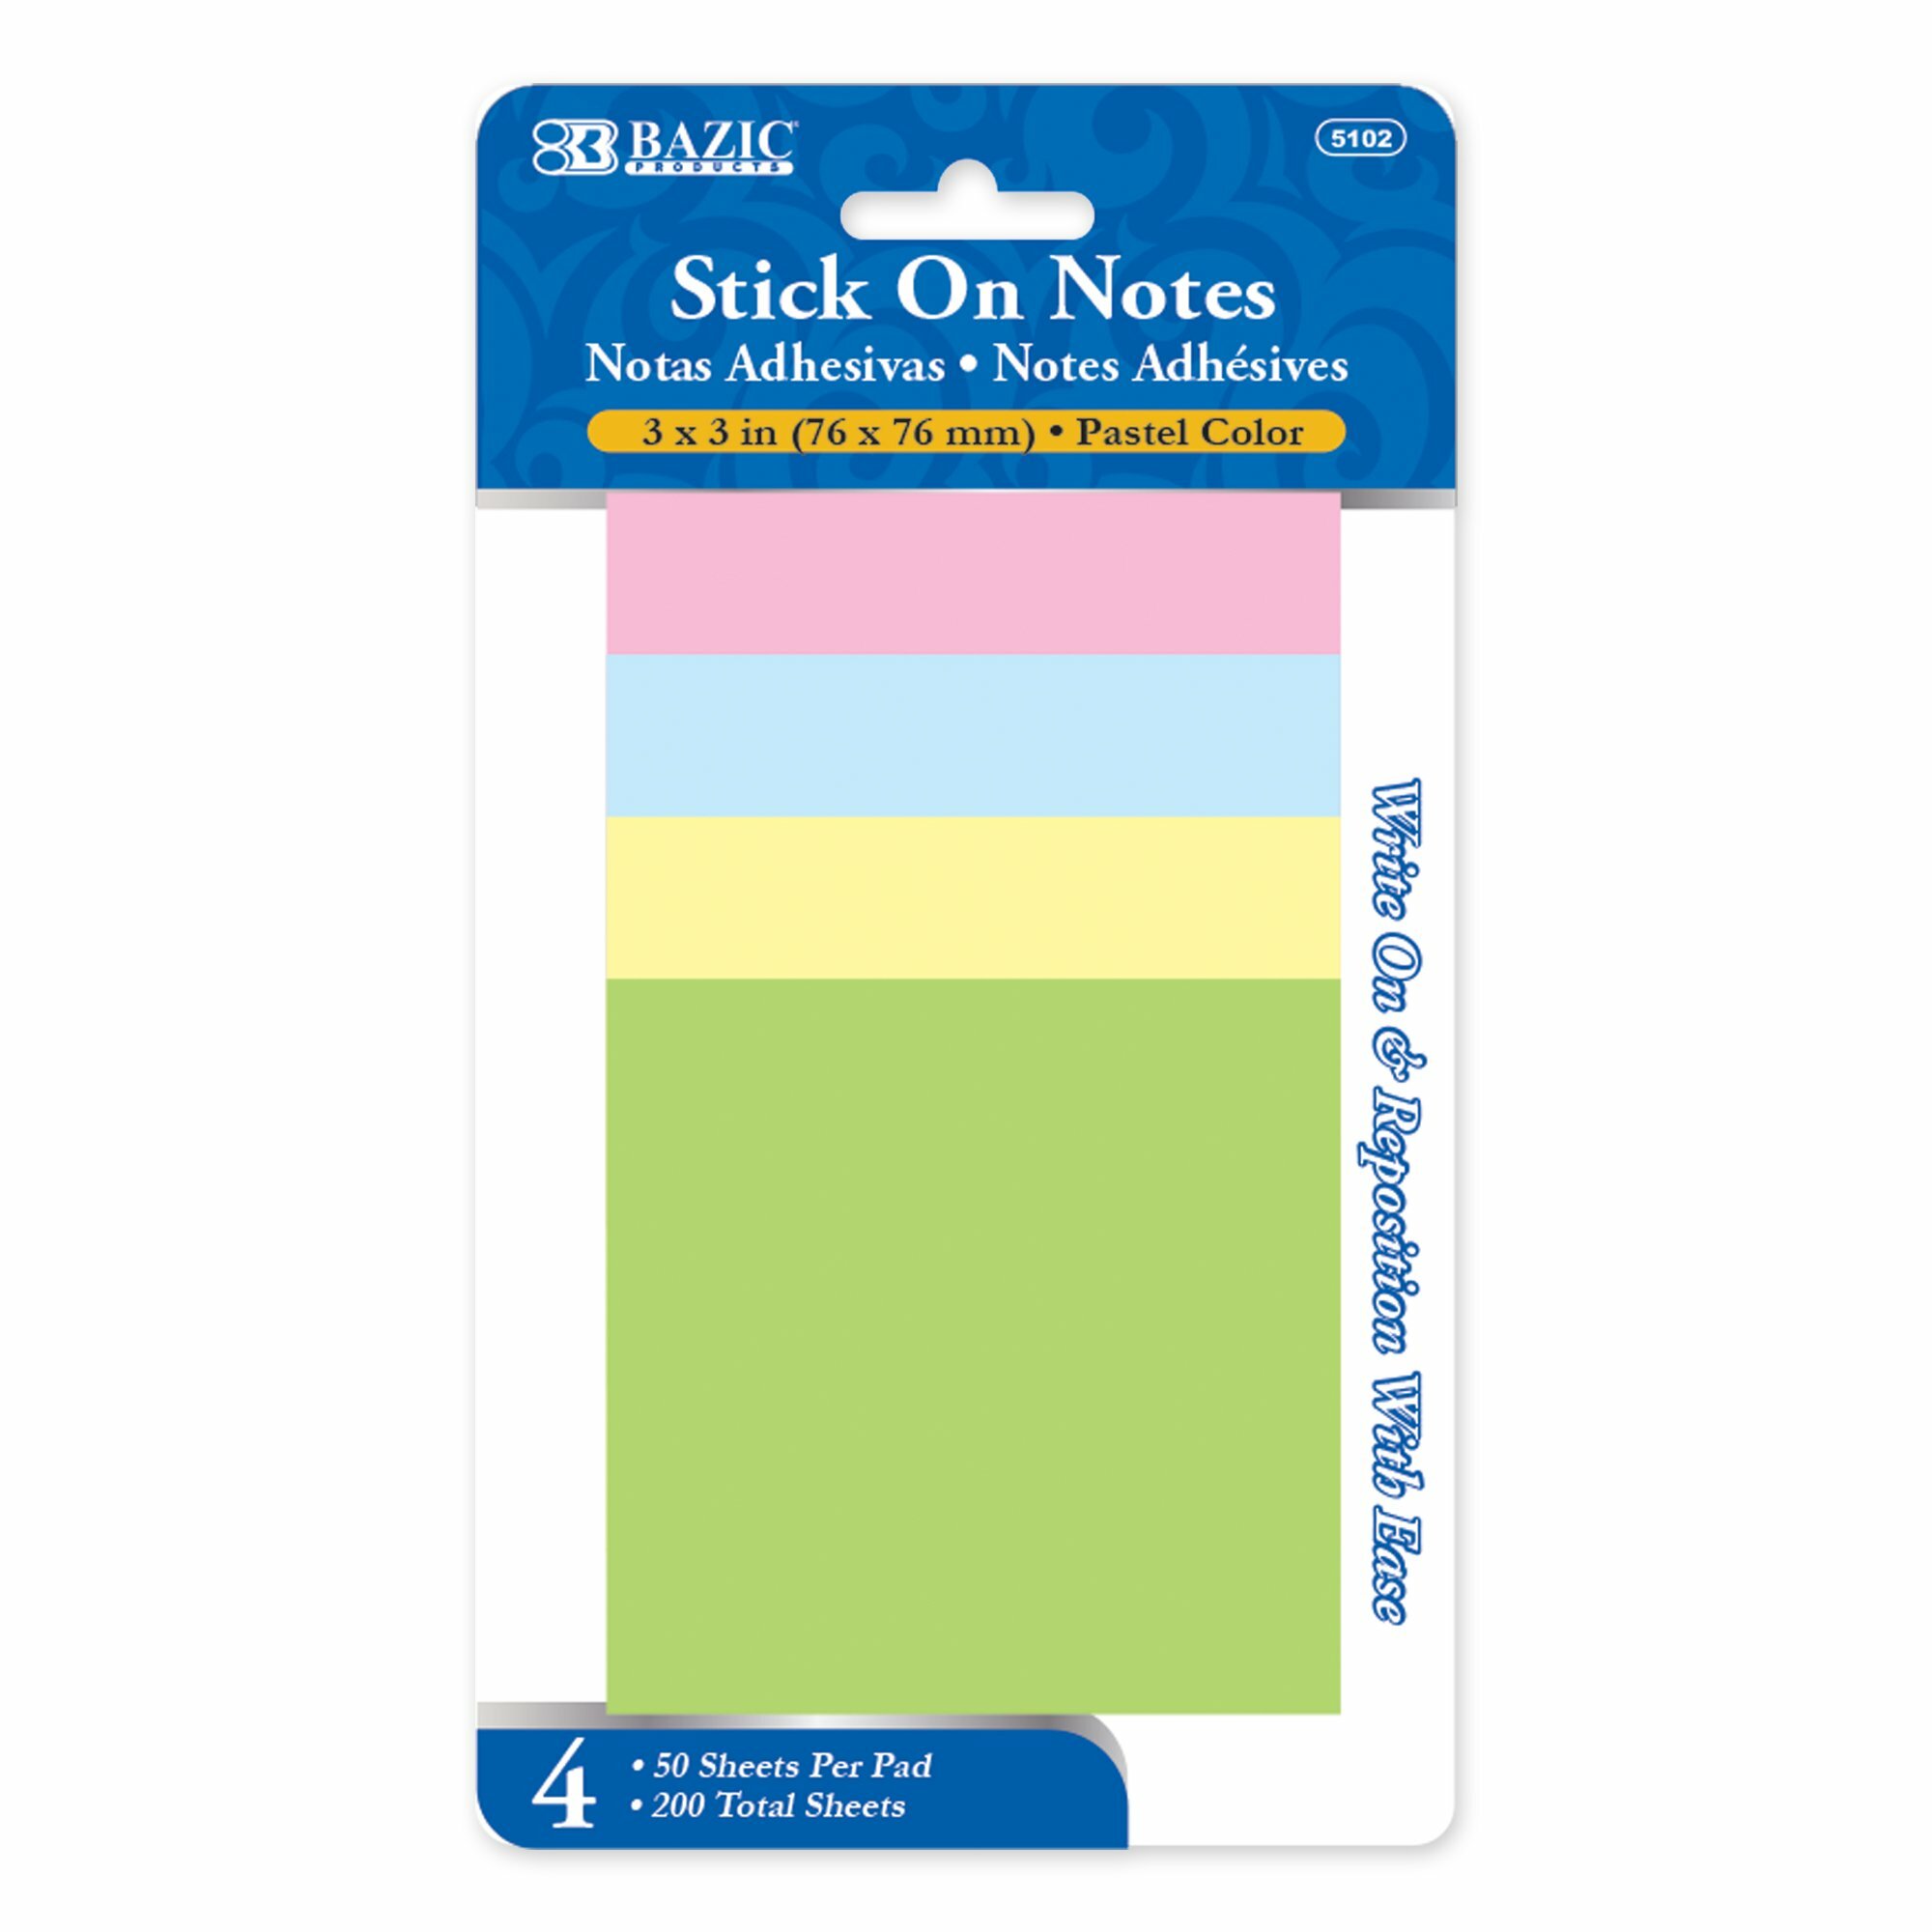 Stick on Notes Bazic 3x3/50 (IN-6) (5102)